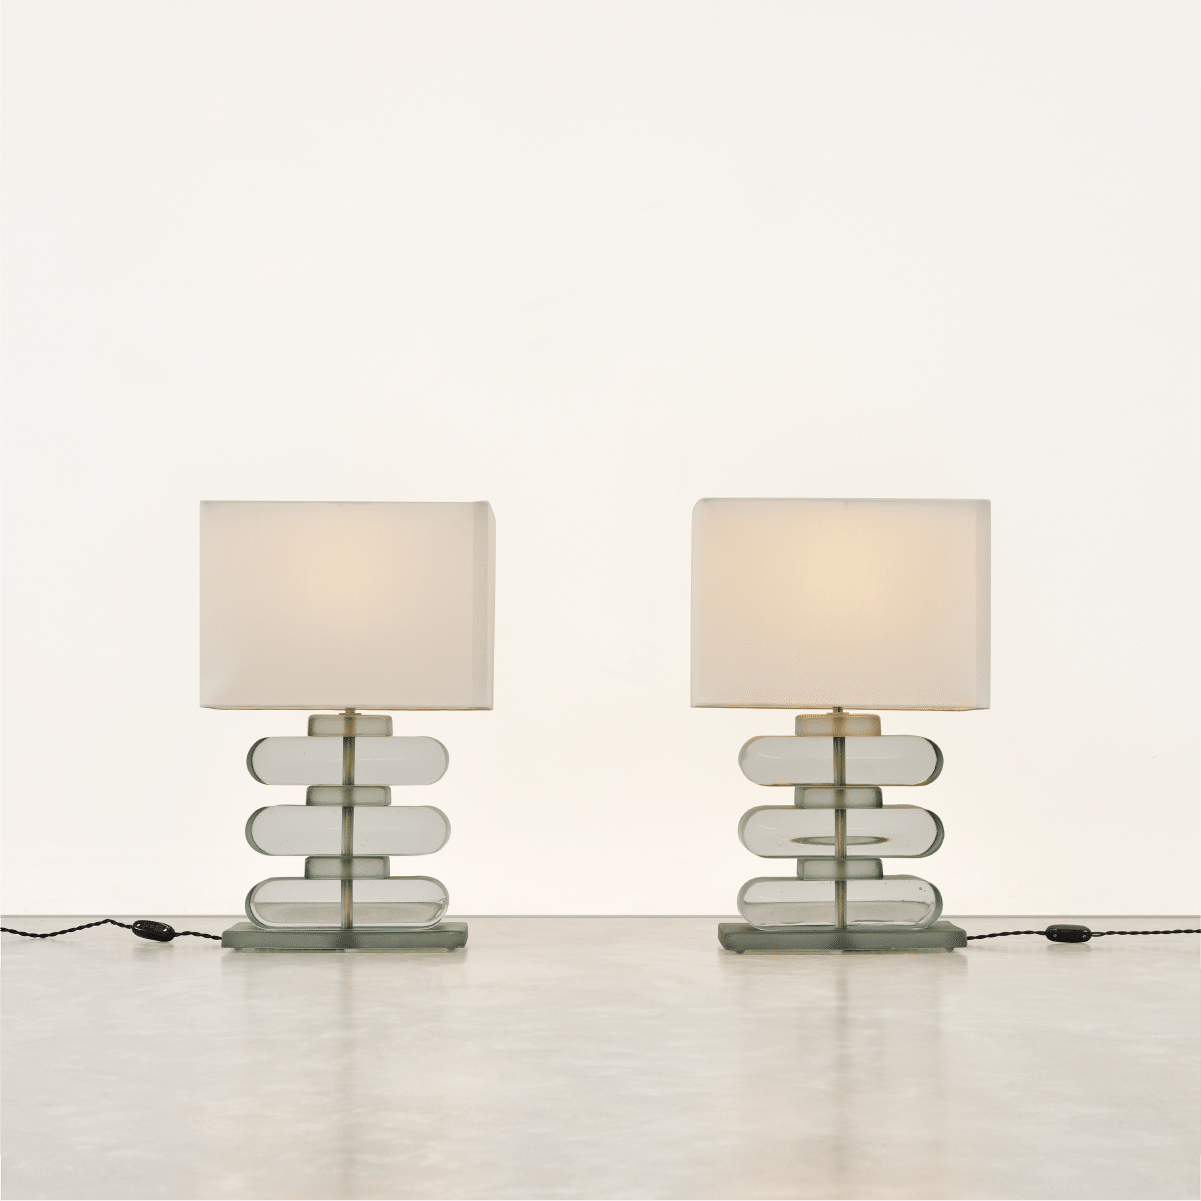 Low res for web_Pair of Lido Table Lamps-